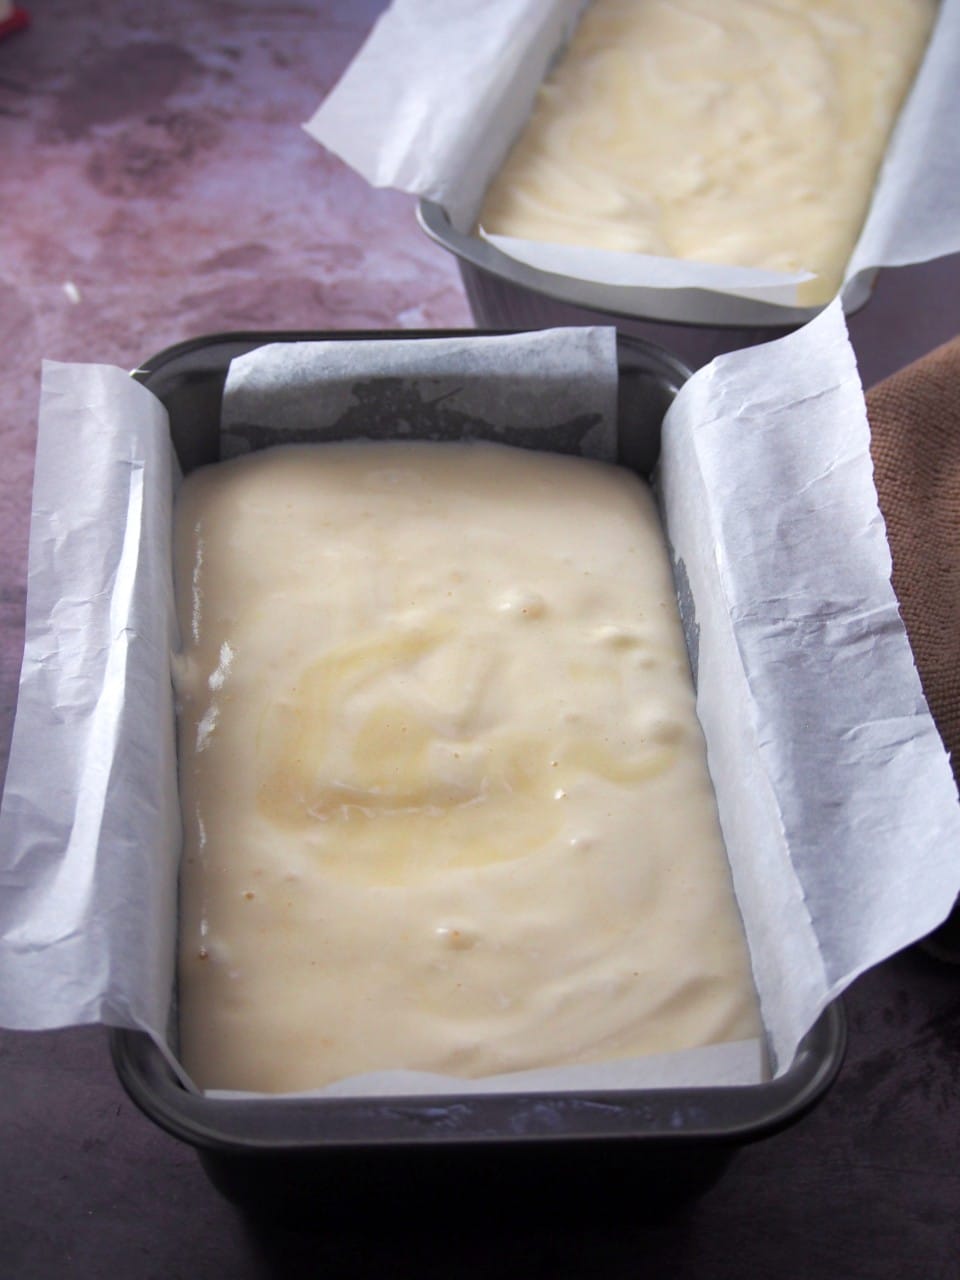 Taisan cake batters in 2 loaf pans, ready for baking.